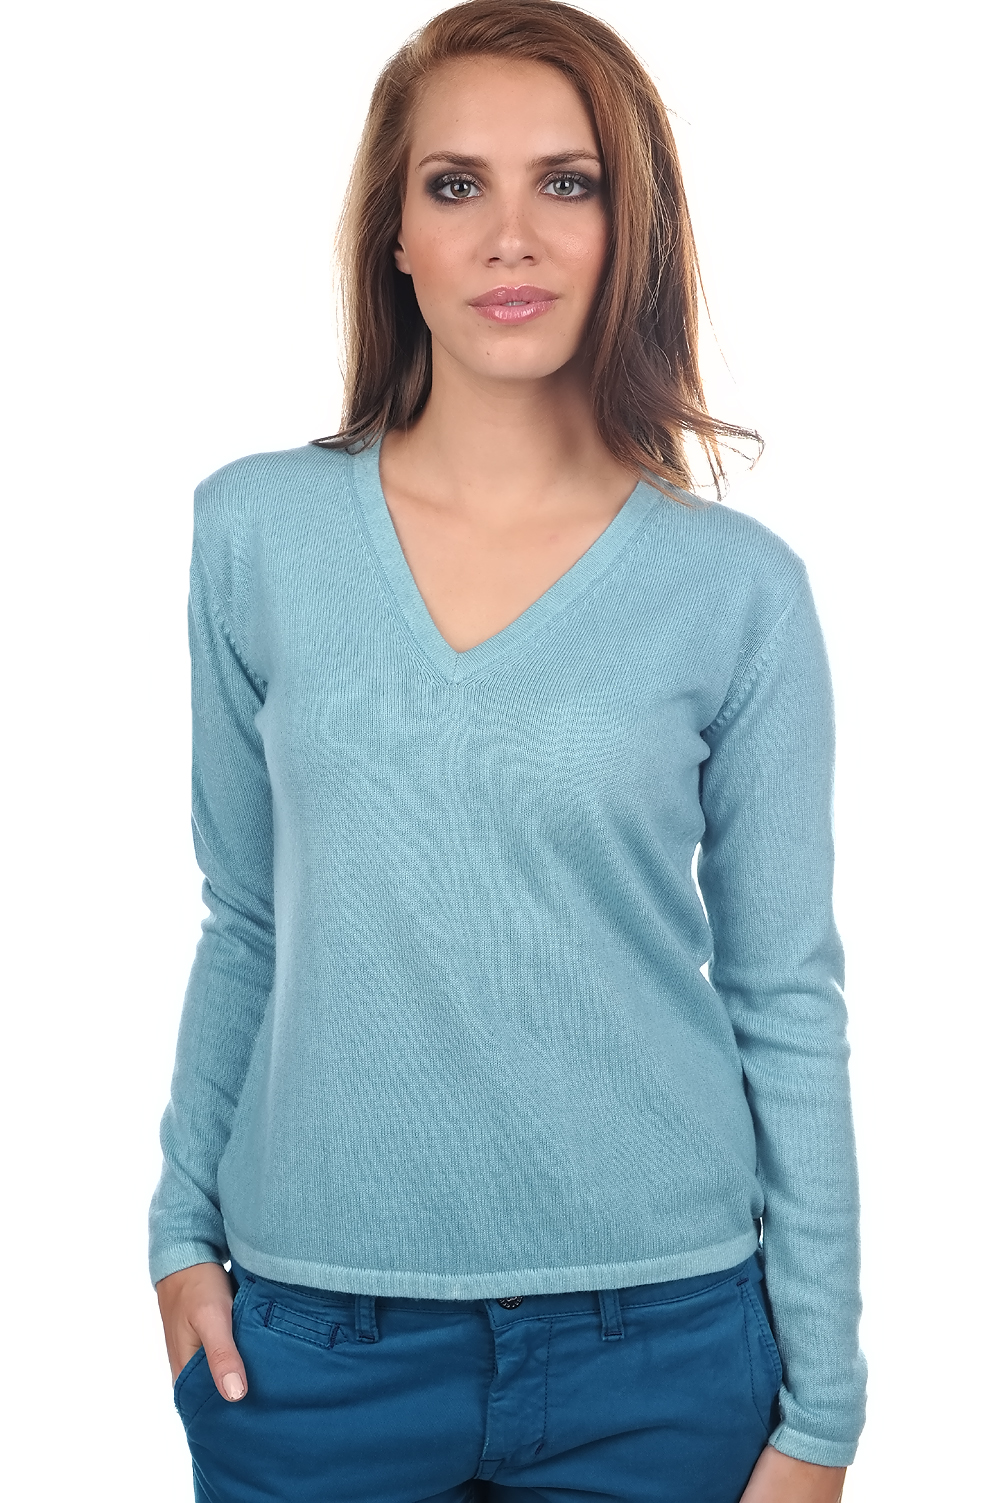 Cashmere ladies spring summer collection emma teal blue 2xl